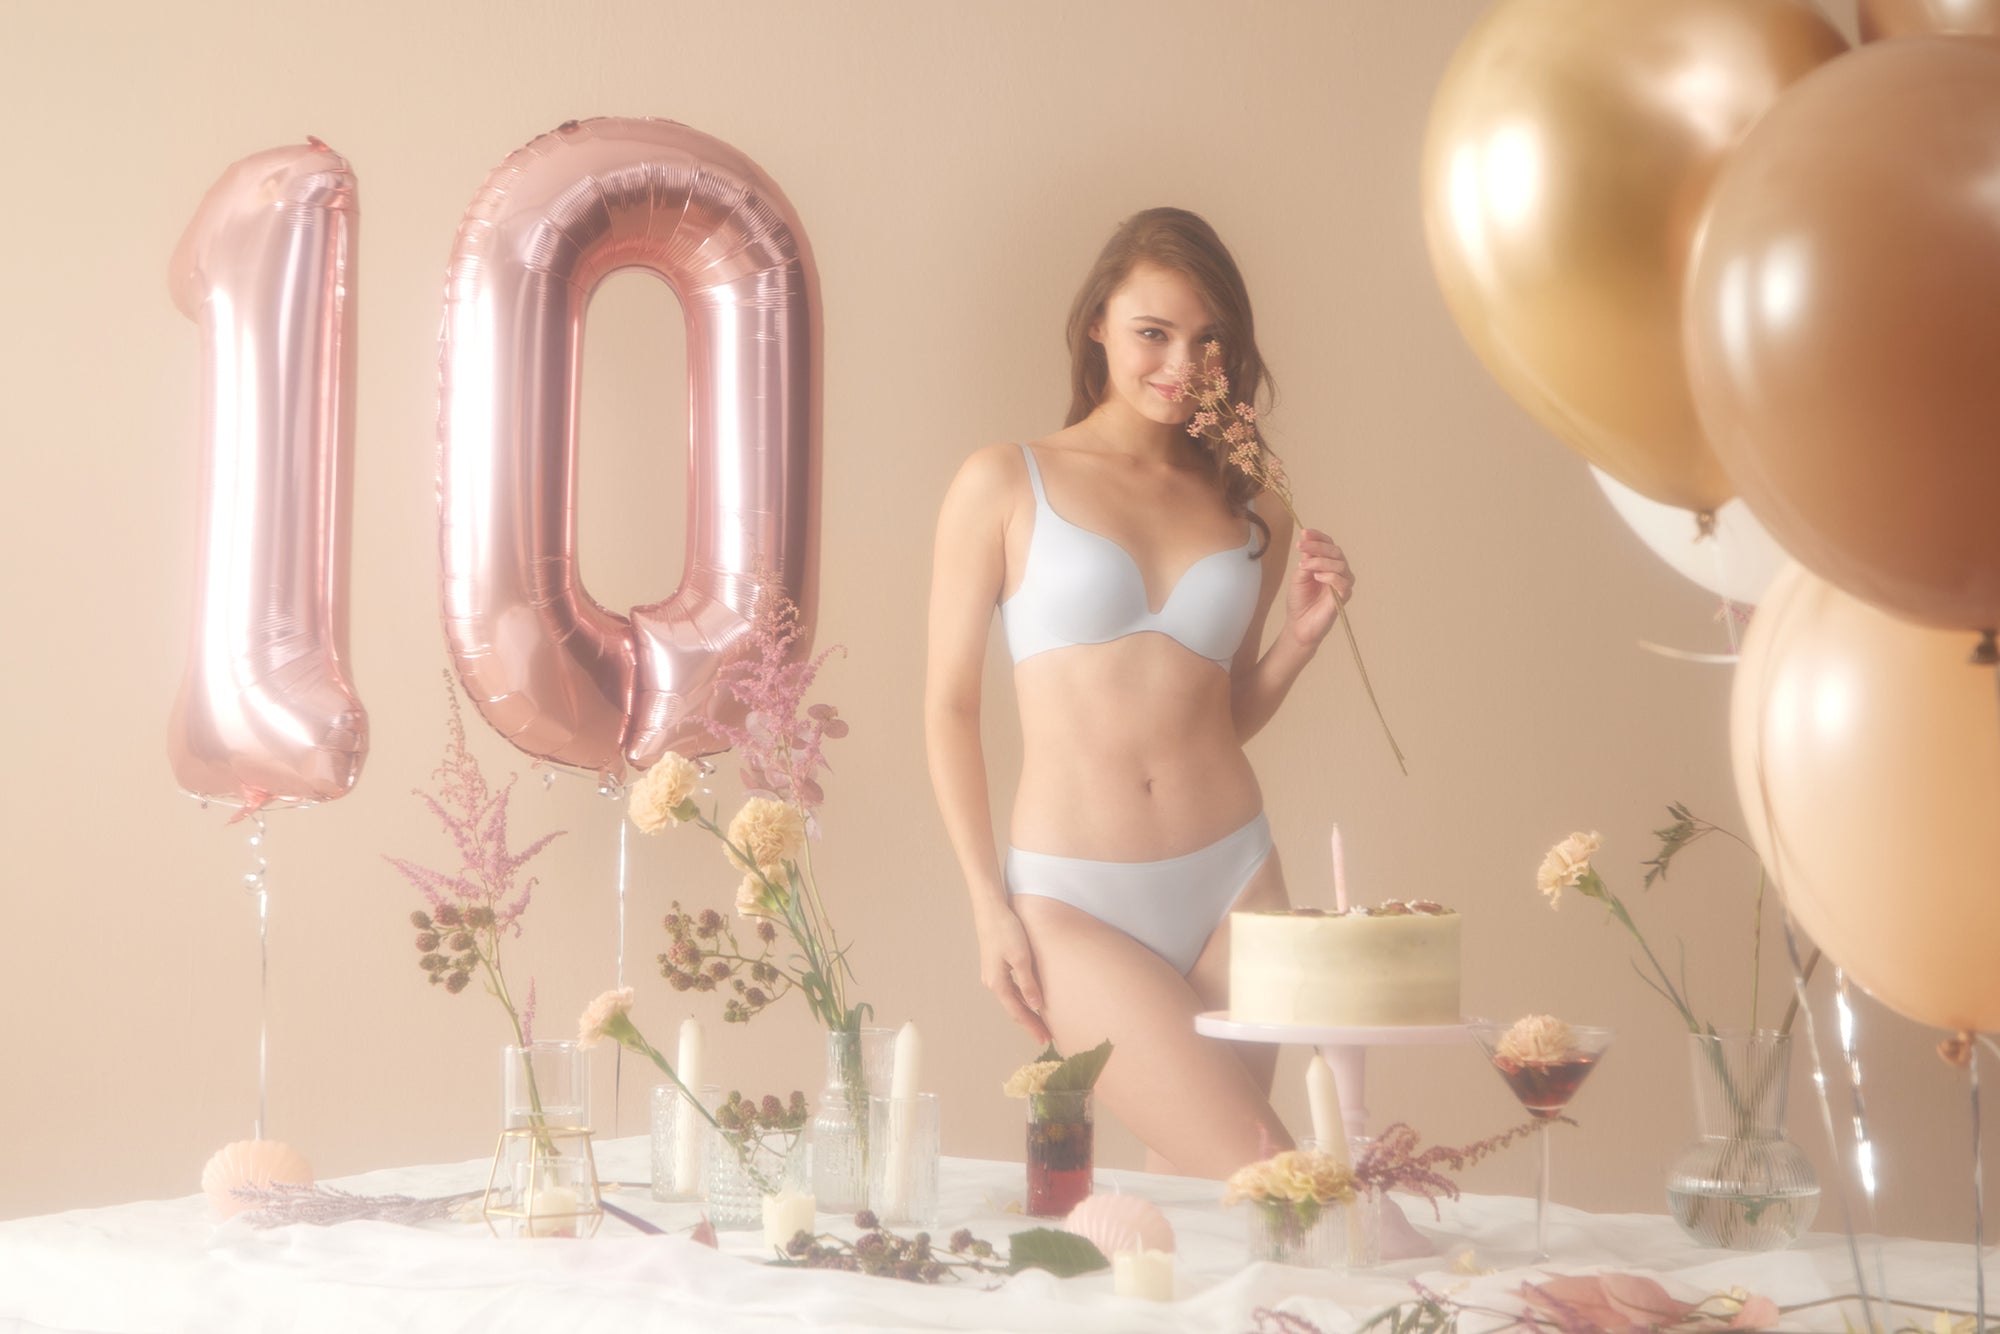 Pierre Cardin Lingerie Miracle Collection is 10!